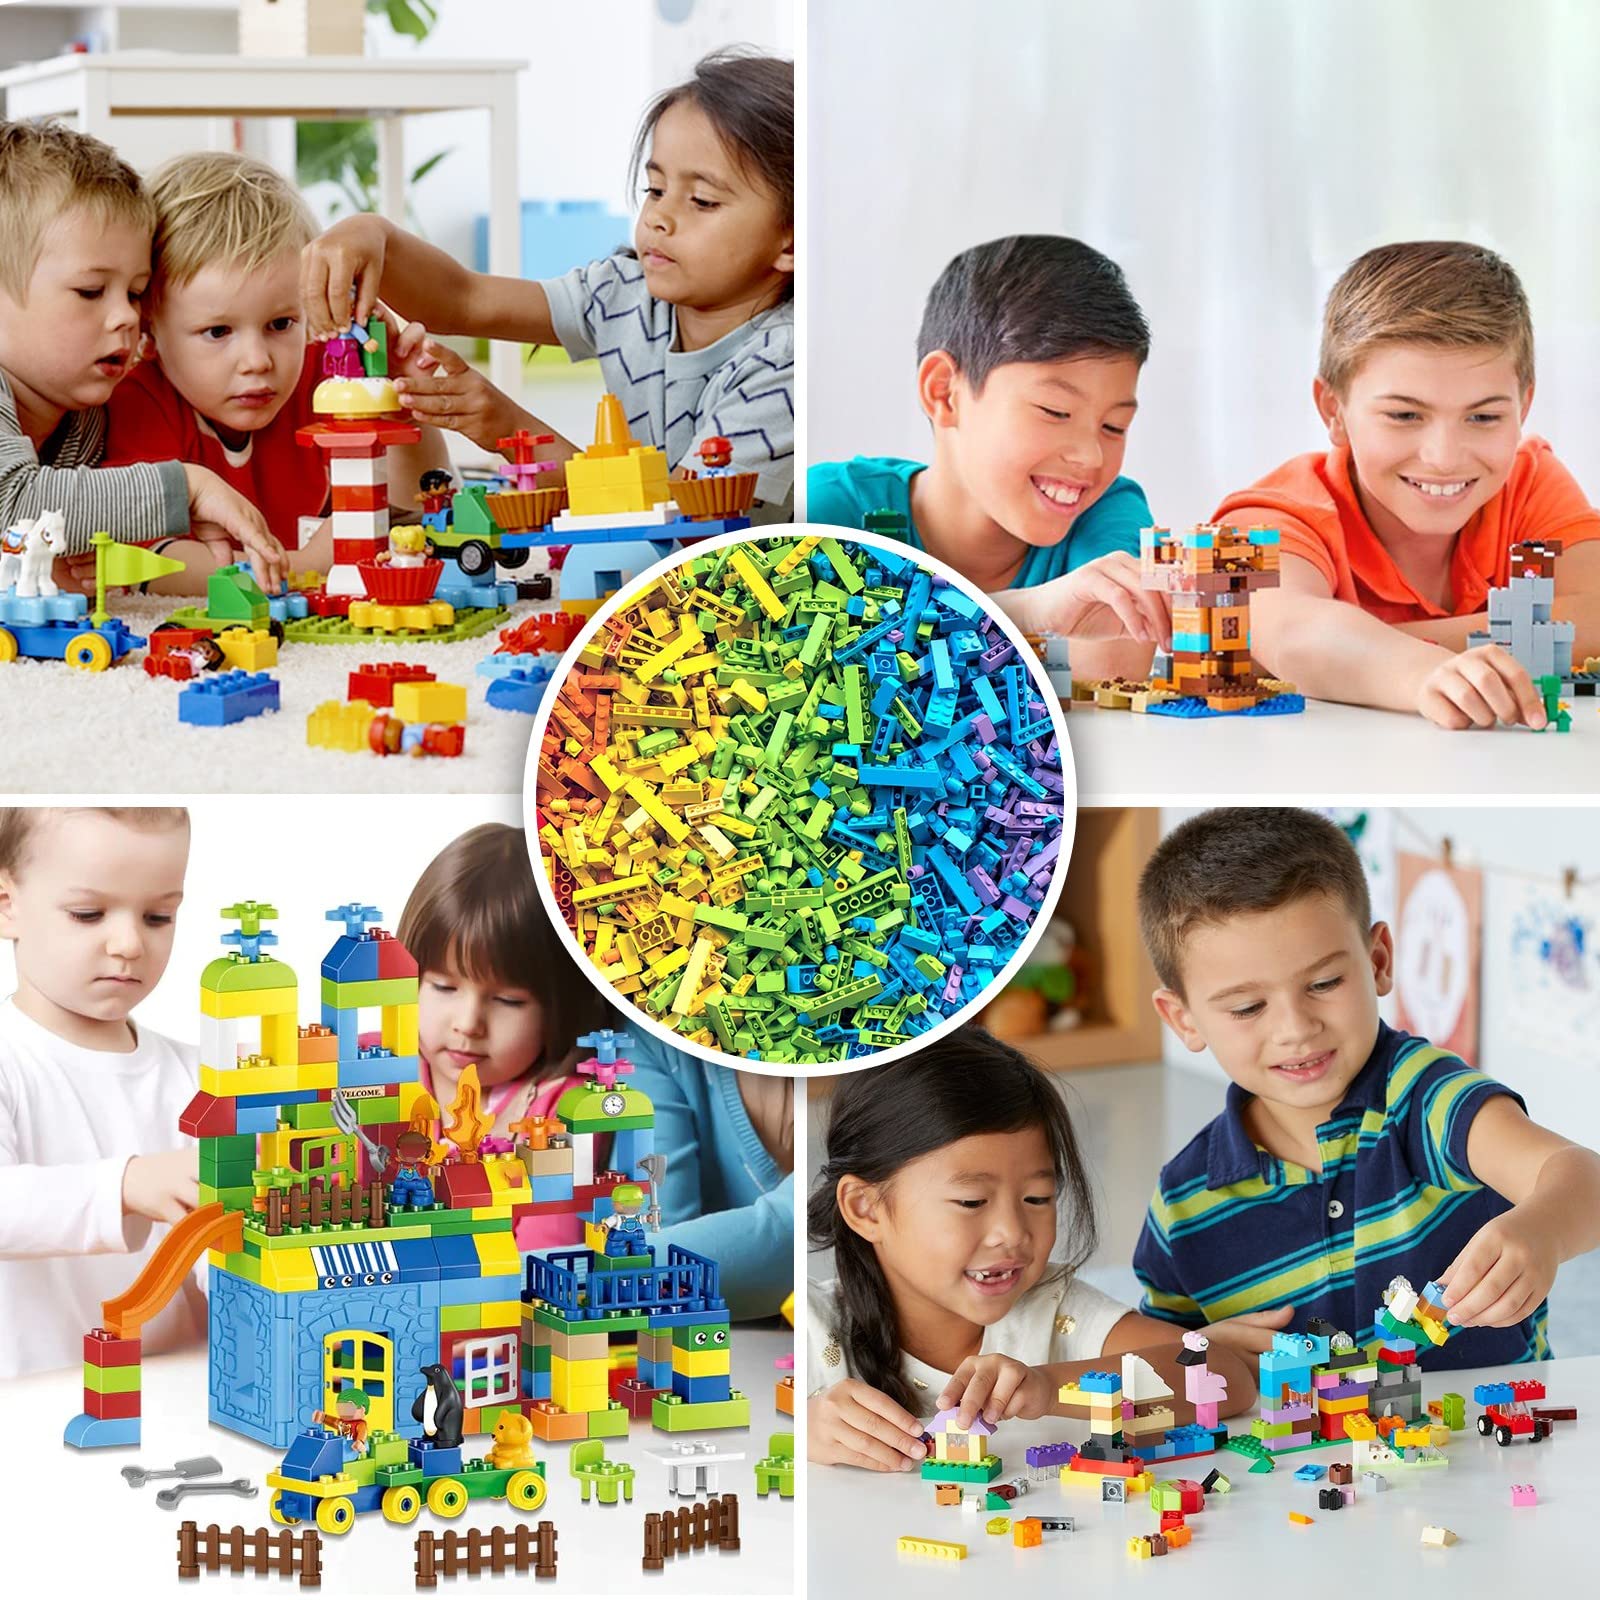 Ogvxcja Building Bricks 2000 Pieces Set - Classic Anime Building Sets and Mini Building Blocks for Ages 5 + Year Old Boys Girls & Adults